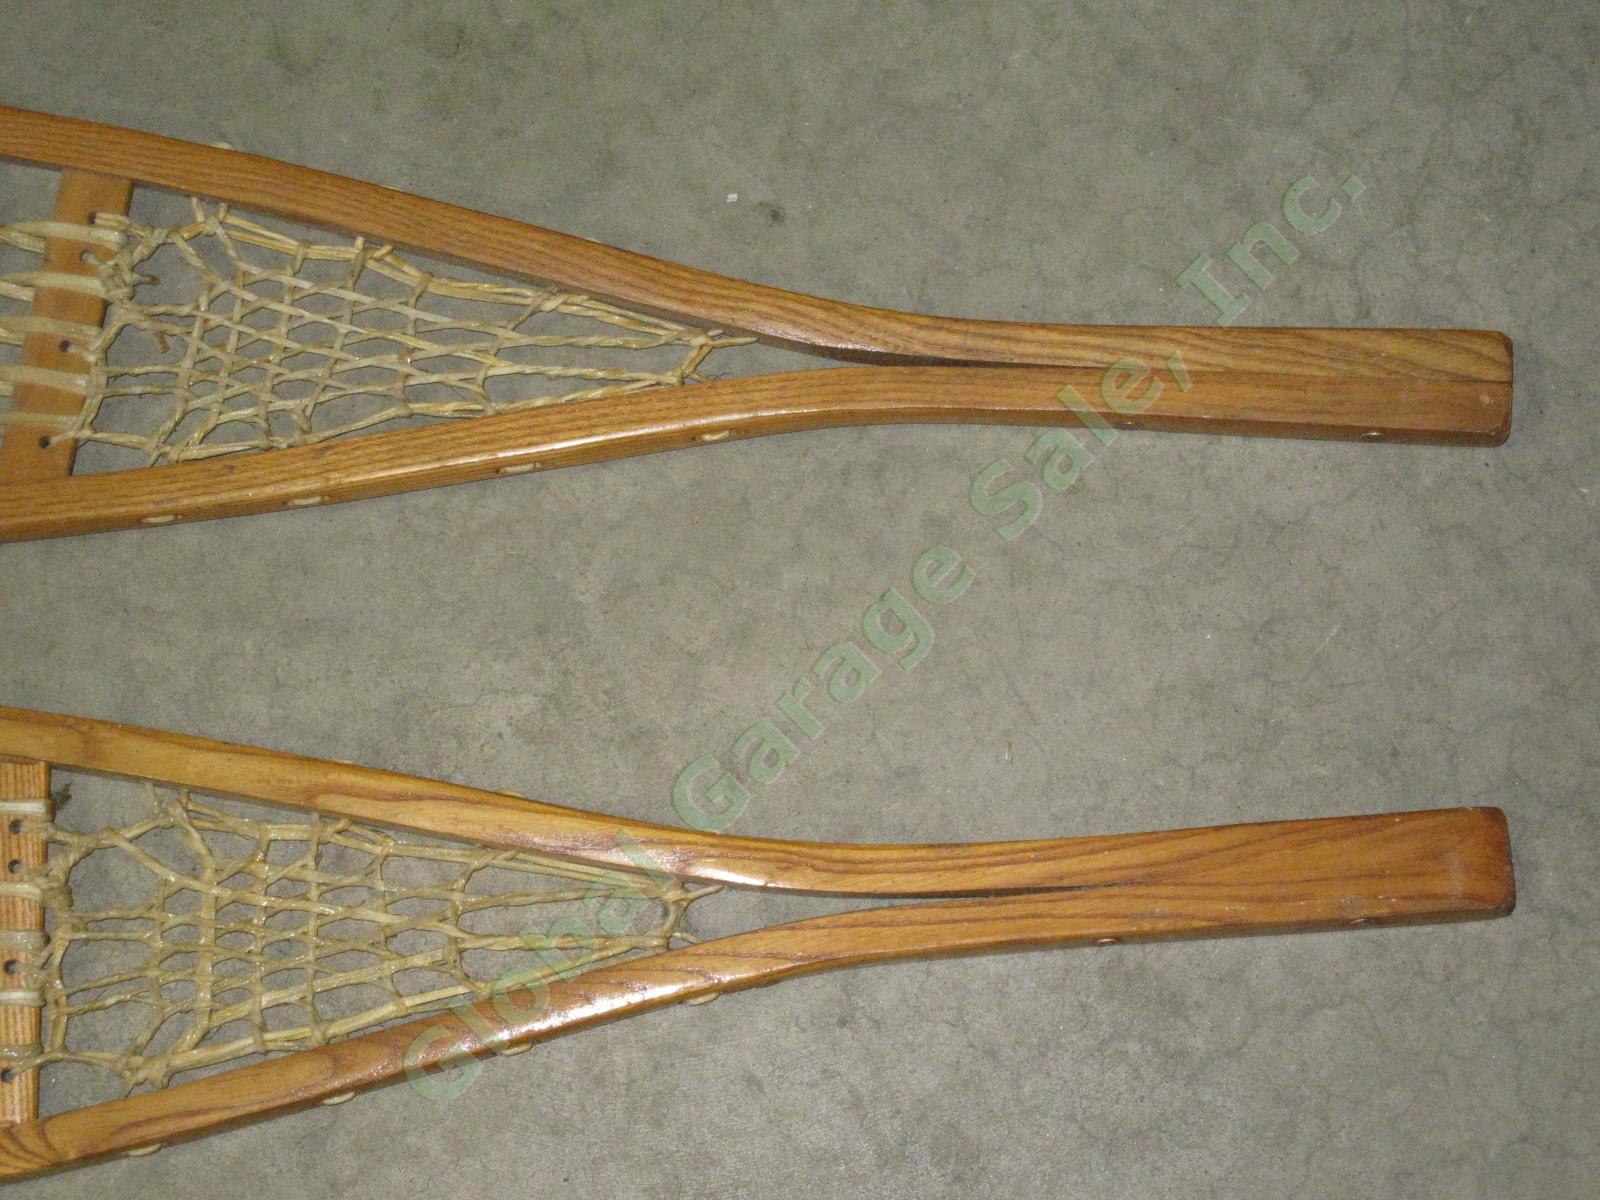 Vtg Wood Wooden Vermont Made Tubbs Snowshoes 10x56-S-0 w/Bindings Exc Cond NR! 3